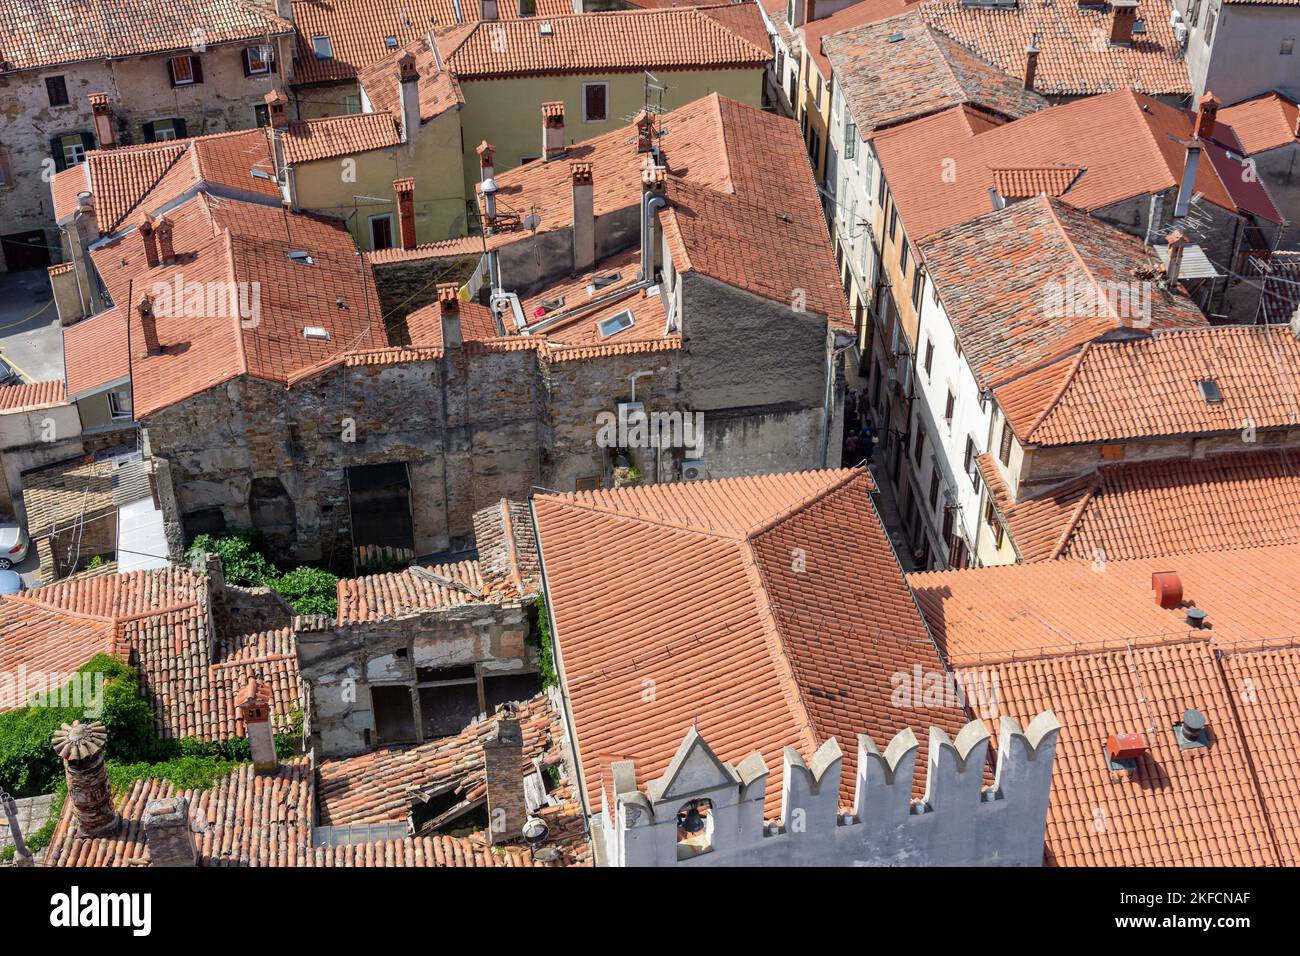 Old Town view from Cathedral of the Assumption tower, Titov trg, Koper, Slovene Istria, Slovenia Stock Photo